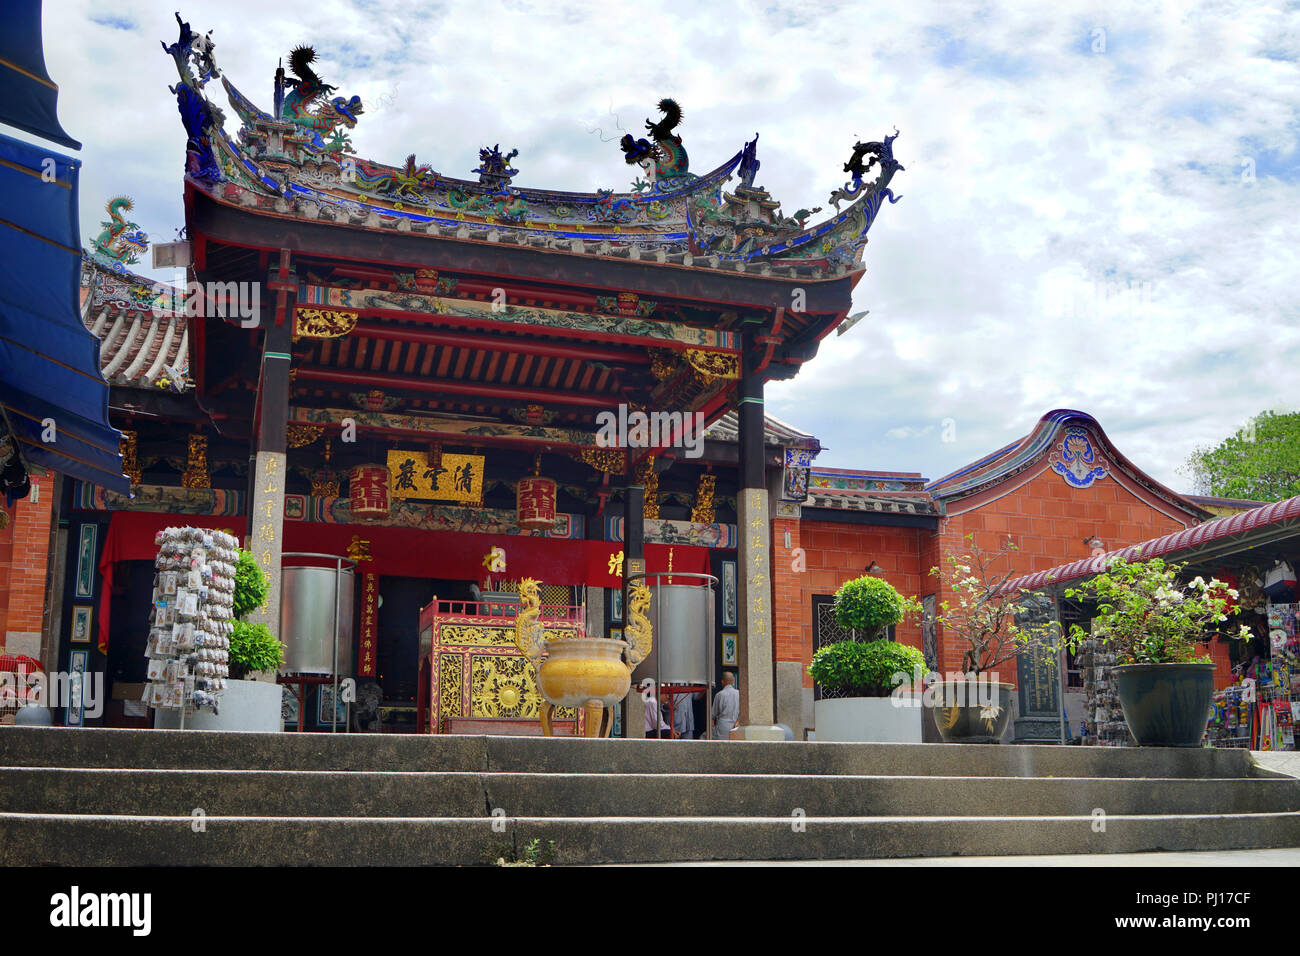 The main entrance of Snake Temple in Bayan Lepas, Penang, one of the major tourist attraction in this heritage town Stock Photo